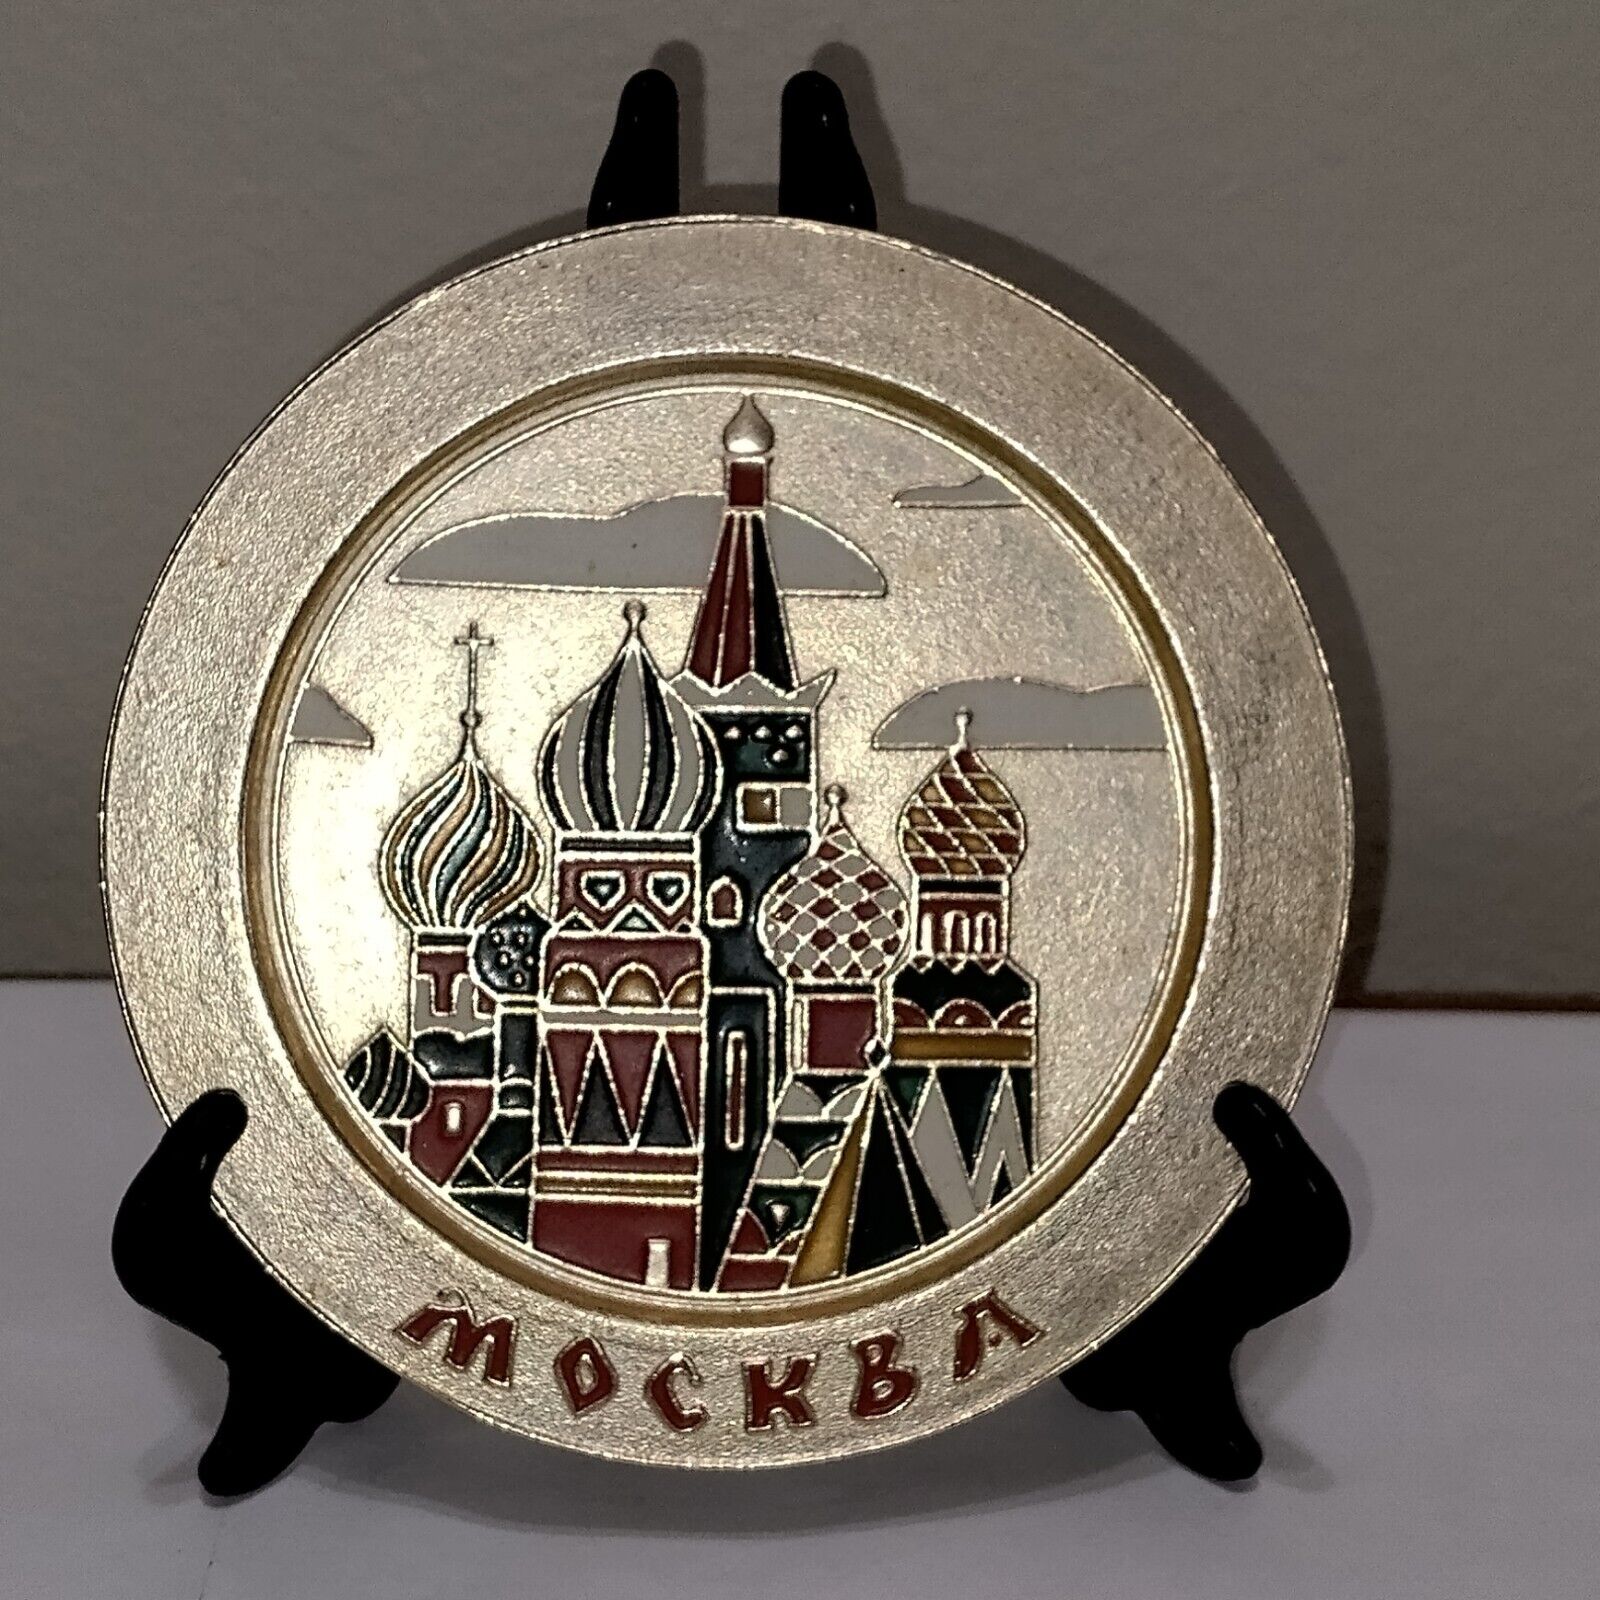 Decor Plate Russian St. Basil\'s Cathedral Moscow Mockba 4.75” Enameled Gold Tone